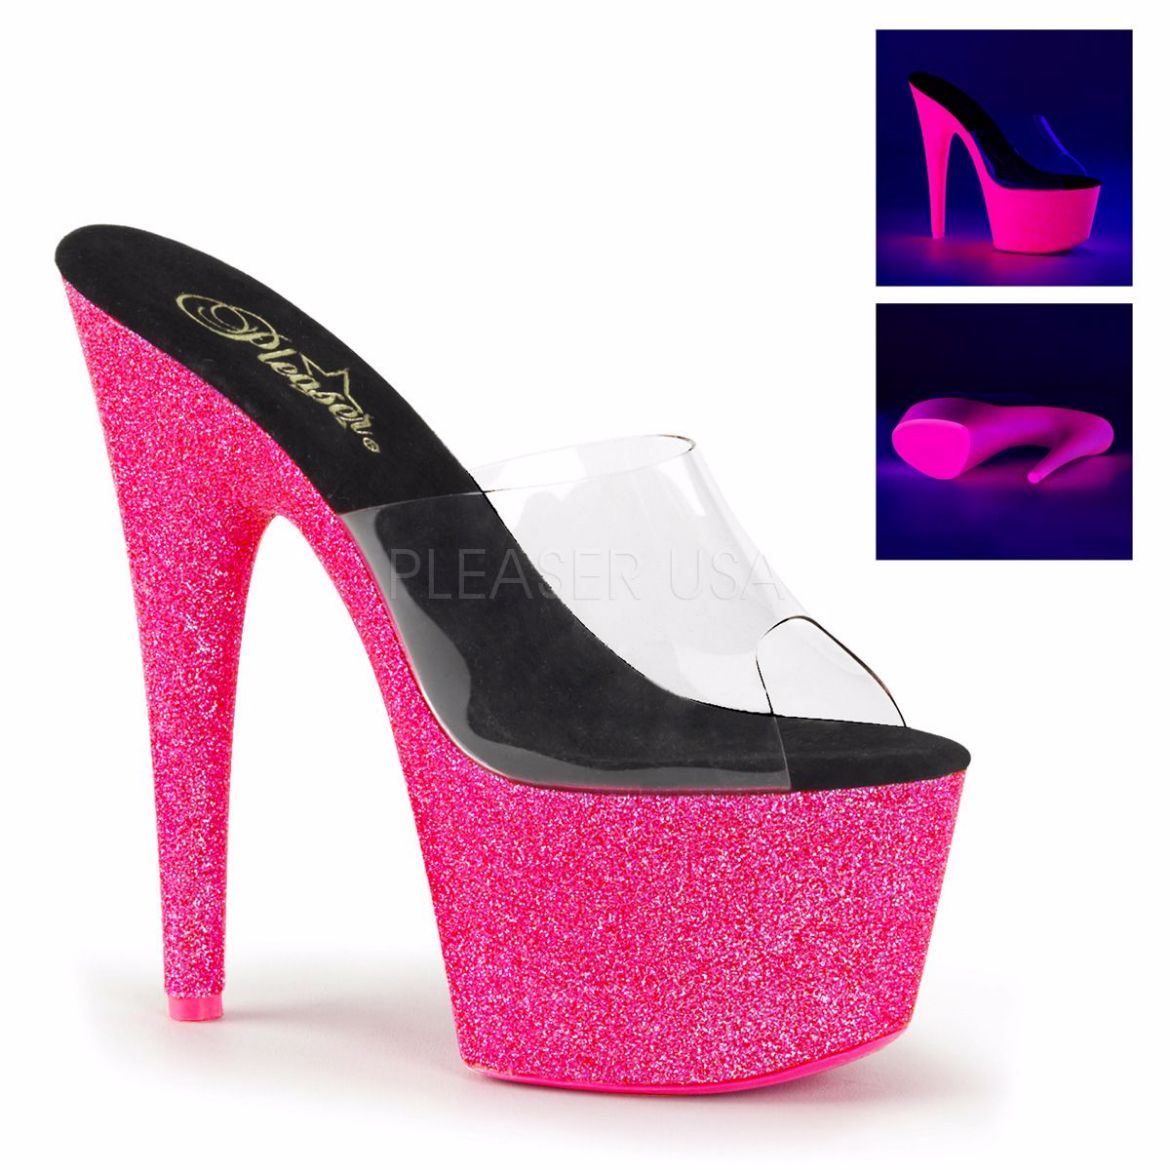 Product image of Pleaser Adore-701Uvg Clear/Neon Hot Pink Glitter, 7 inch (17.8 cm) Heel, 2 3/4 inch (7 cm) Platform Slide Mule Shoes